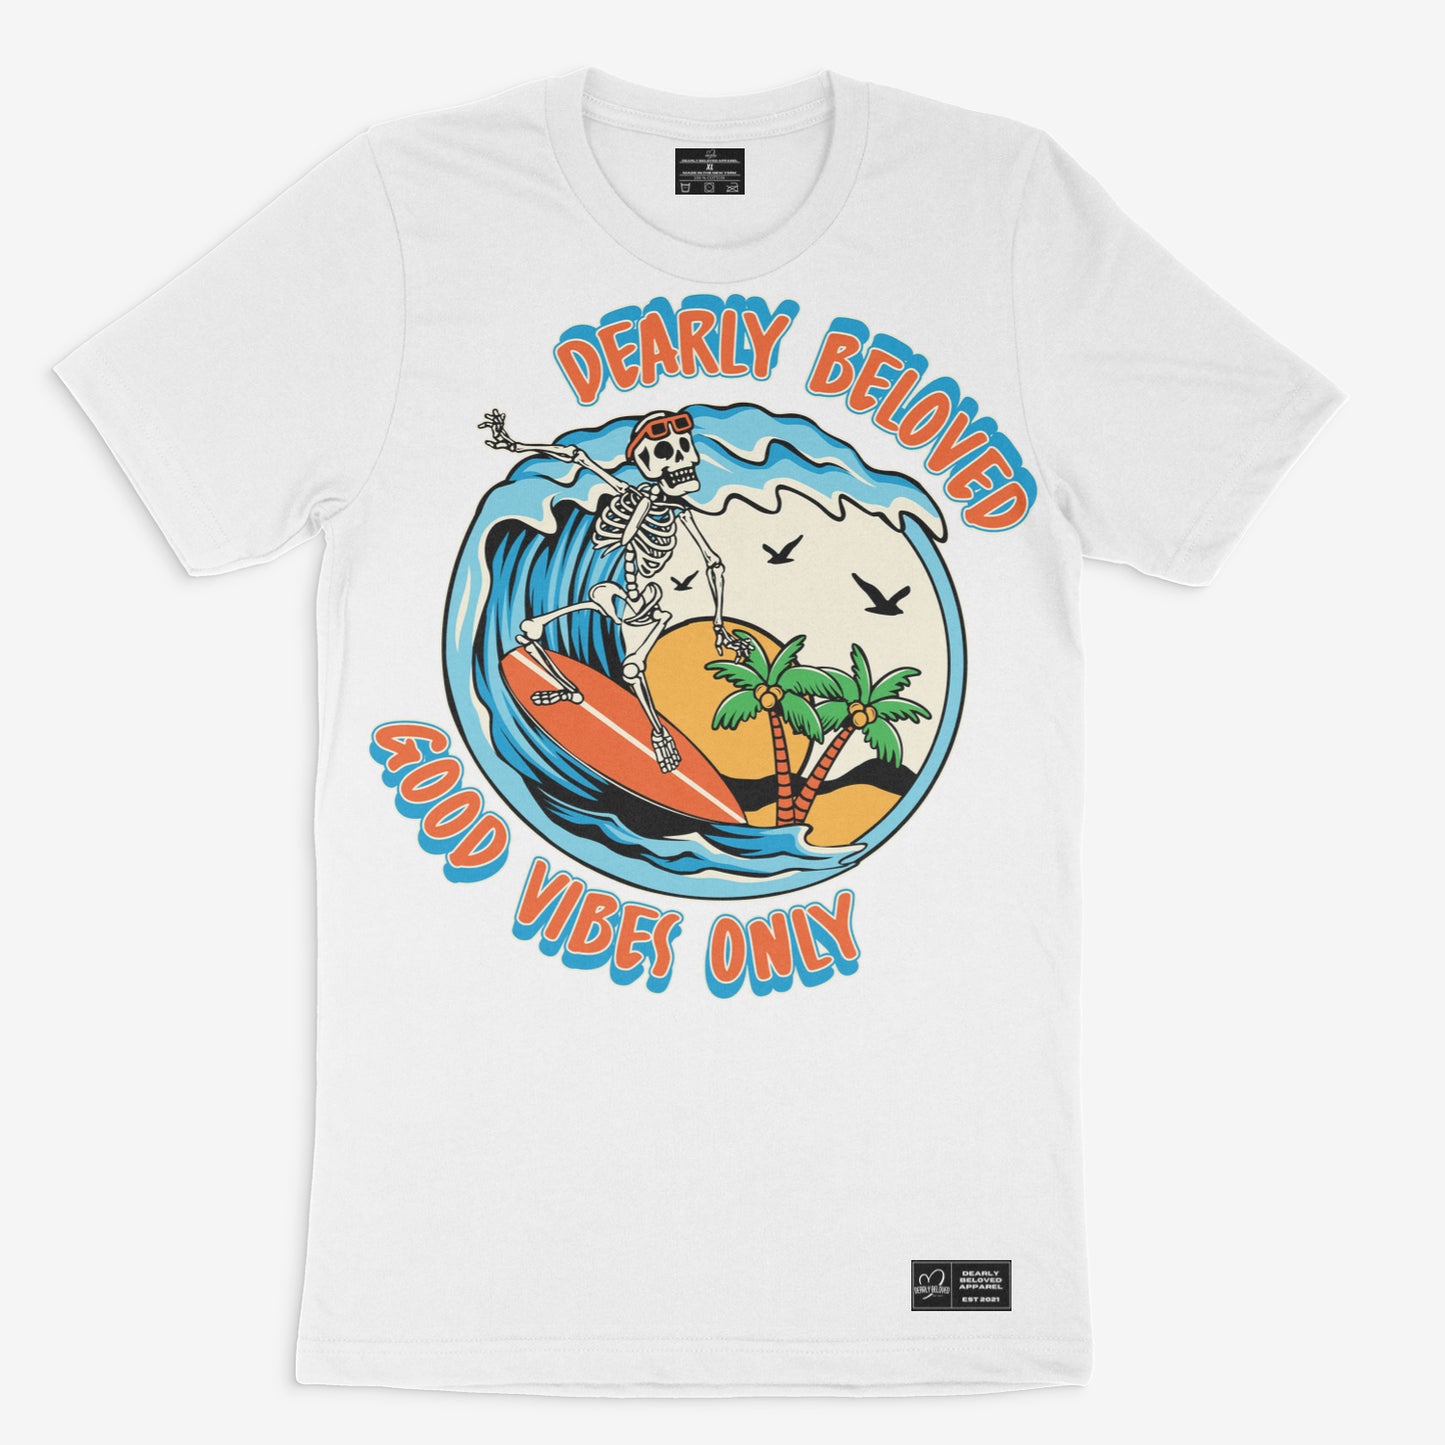 Good vibes only T shirt